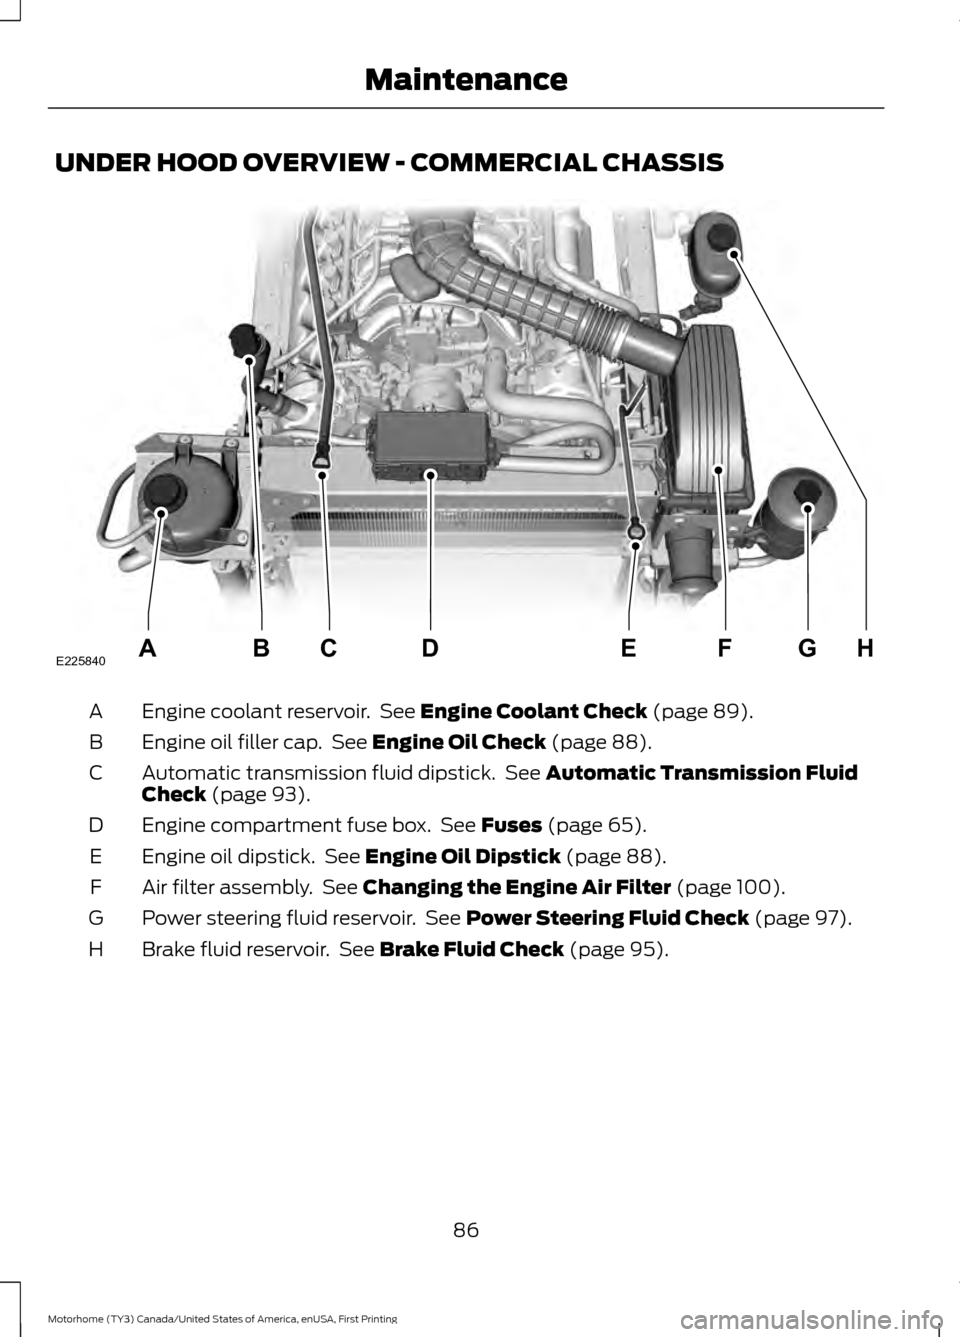 FORD F SERIES MOTORHOME AND COMMERCIAL CHASSIS 2017 13.G User Guide UNDER HOOD OVERVIEW - COMMERCIAL CHASSIS
Engine coolant reservoir.  See Engine Coolant Check (page 89).
A
Engine oil filler cap.  See 
Engine Oil Check (page 88).
B
Automatic transmission fluid dipsti